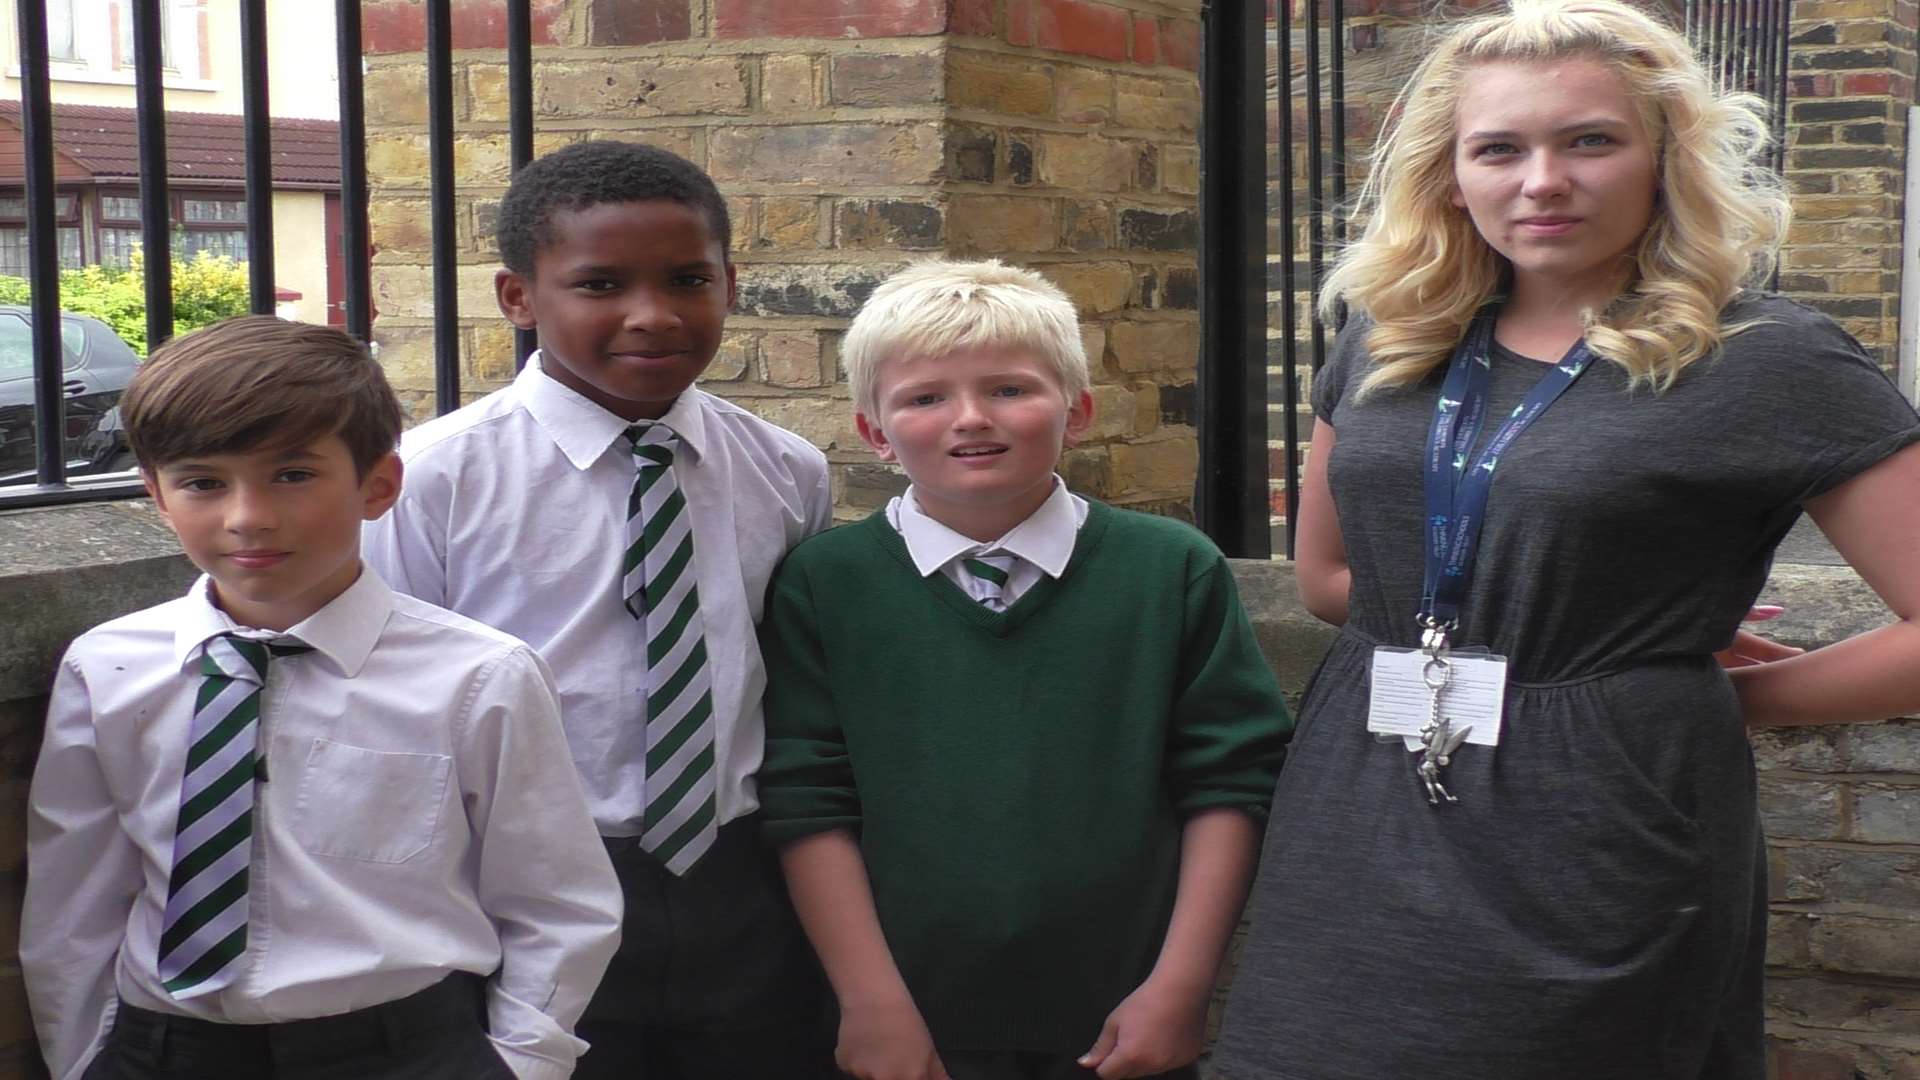 Oscar, nine, Kamarl and Max, both 10, and teaching assistant Jessica Yelton, who has re-homed the kitten